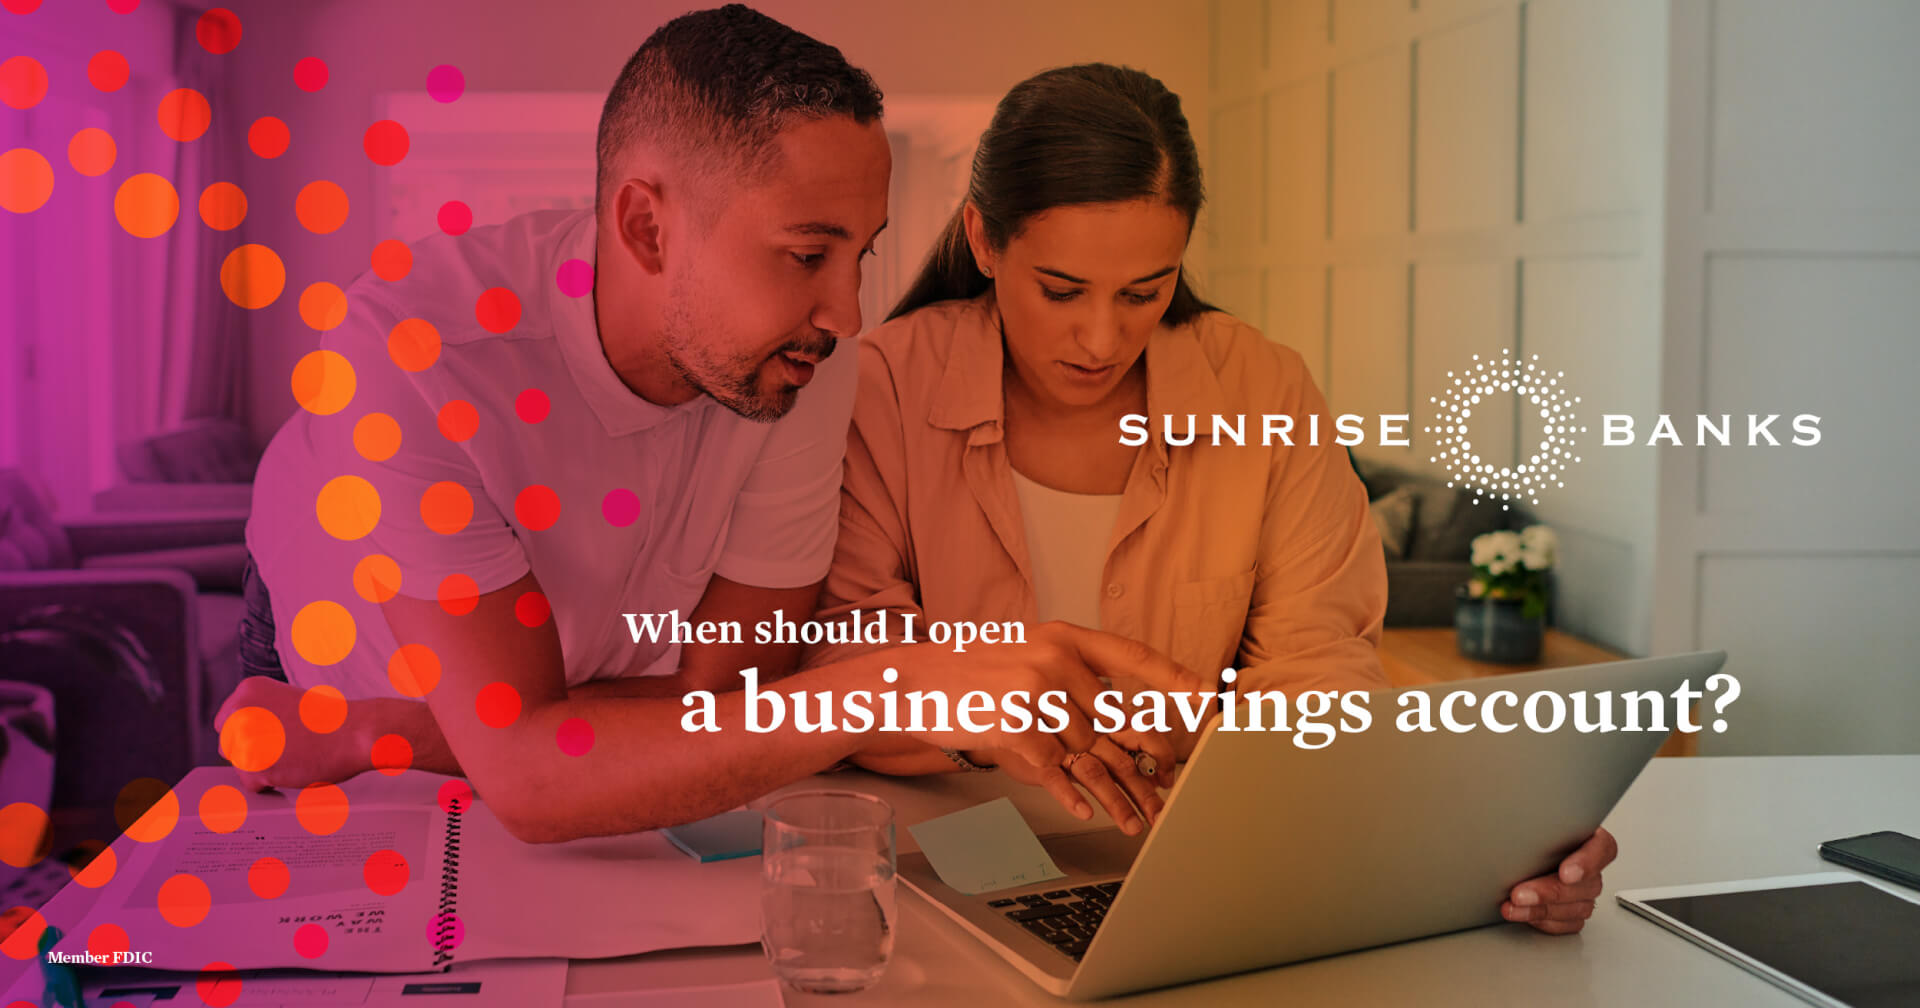 When should I open a business savings account?